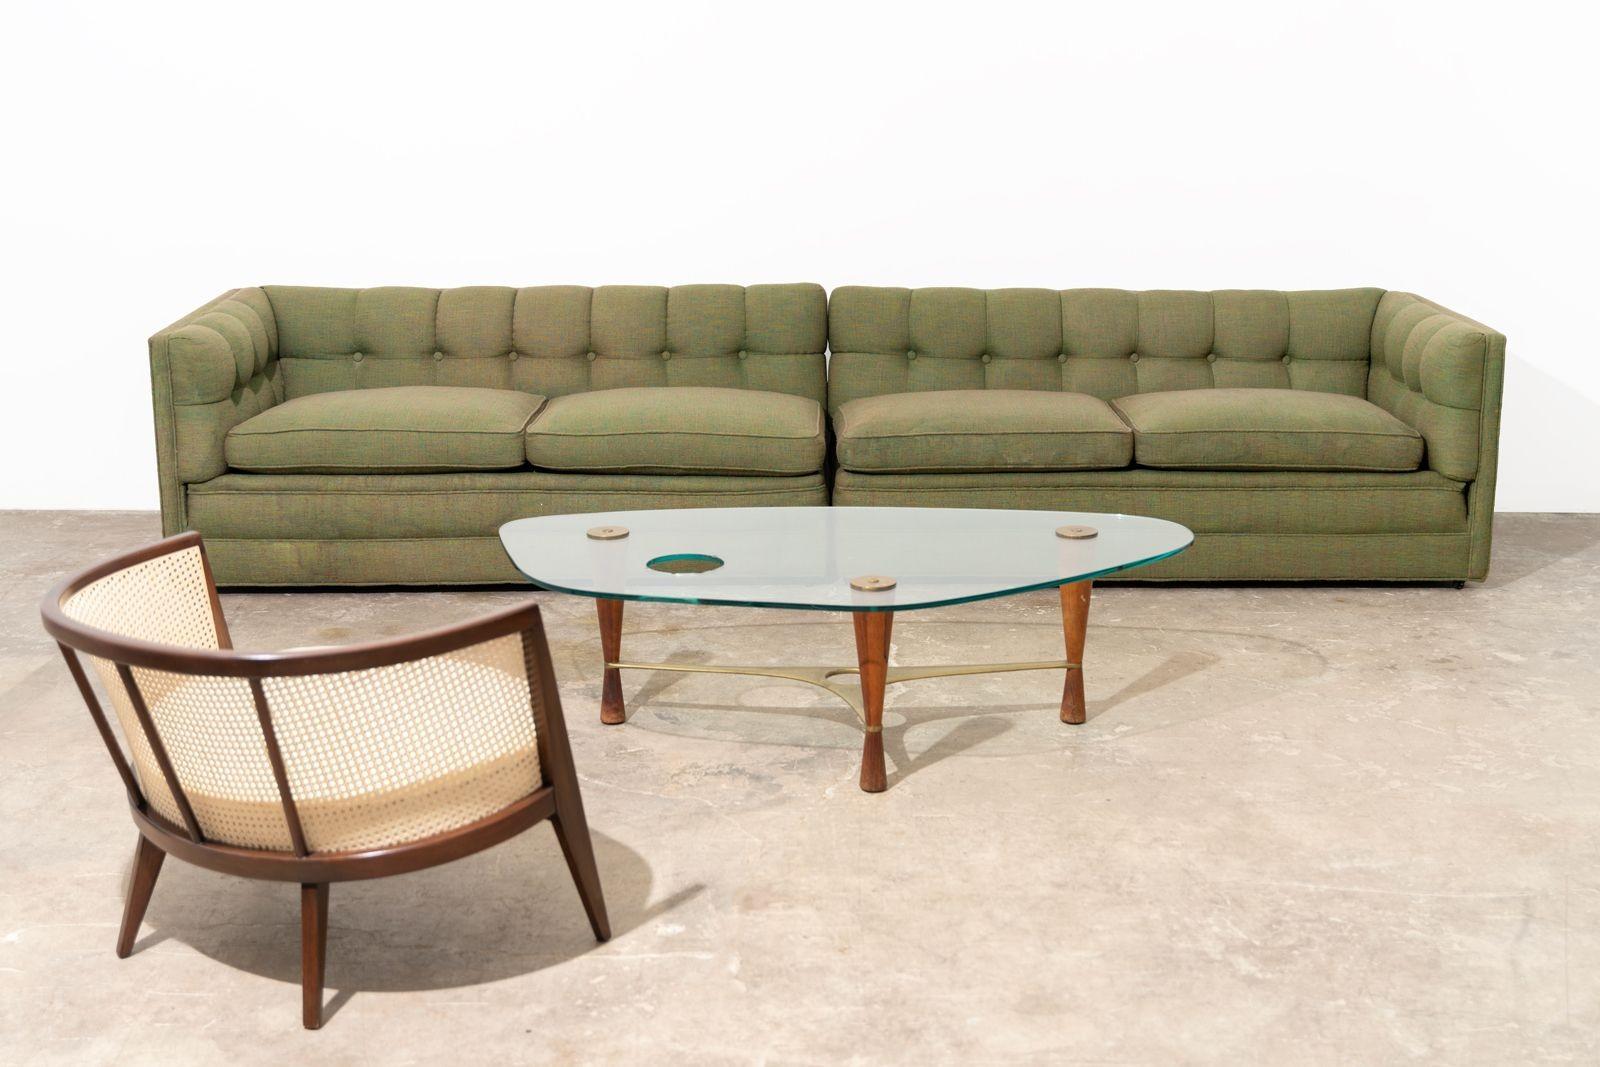 Mid-Century Modern Harvey Probber Deep Tufted Sectional from the Nuclear Sert Series Early 1950s For Sale